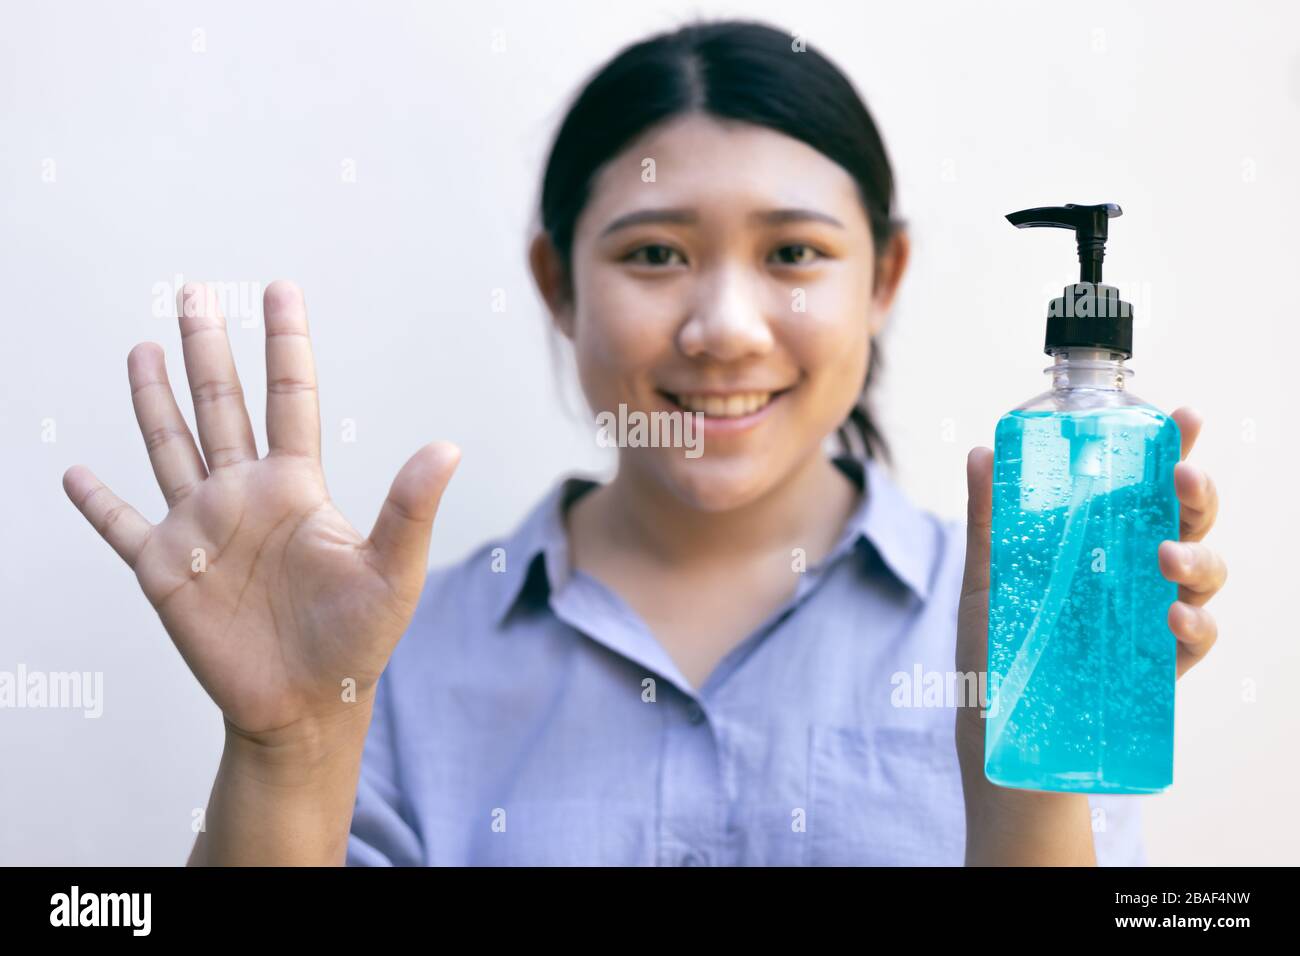 Clean hand using alcohol gel hand sanitizer cleaners for anti becteria and protect from Coronavirus Disease 2019 (COVID-19) virus outbreaks. Stock Photo